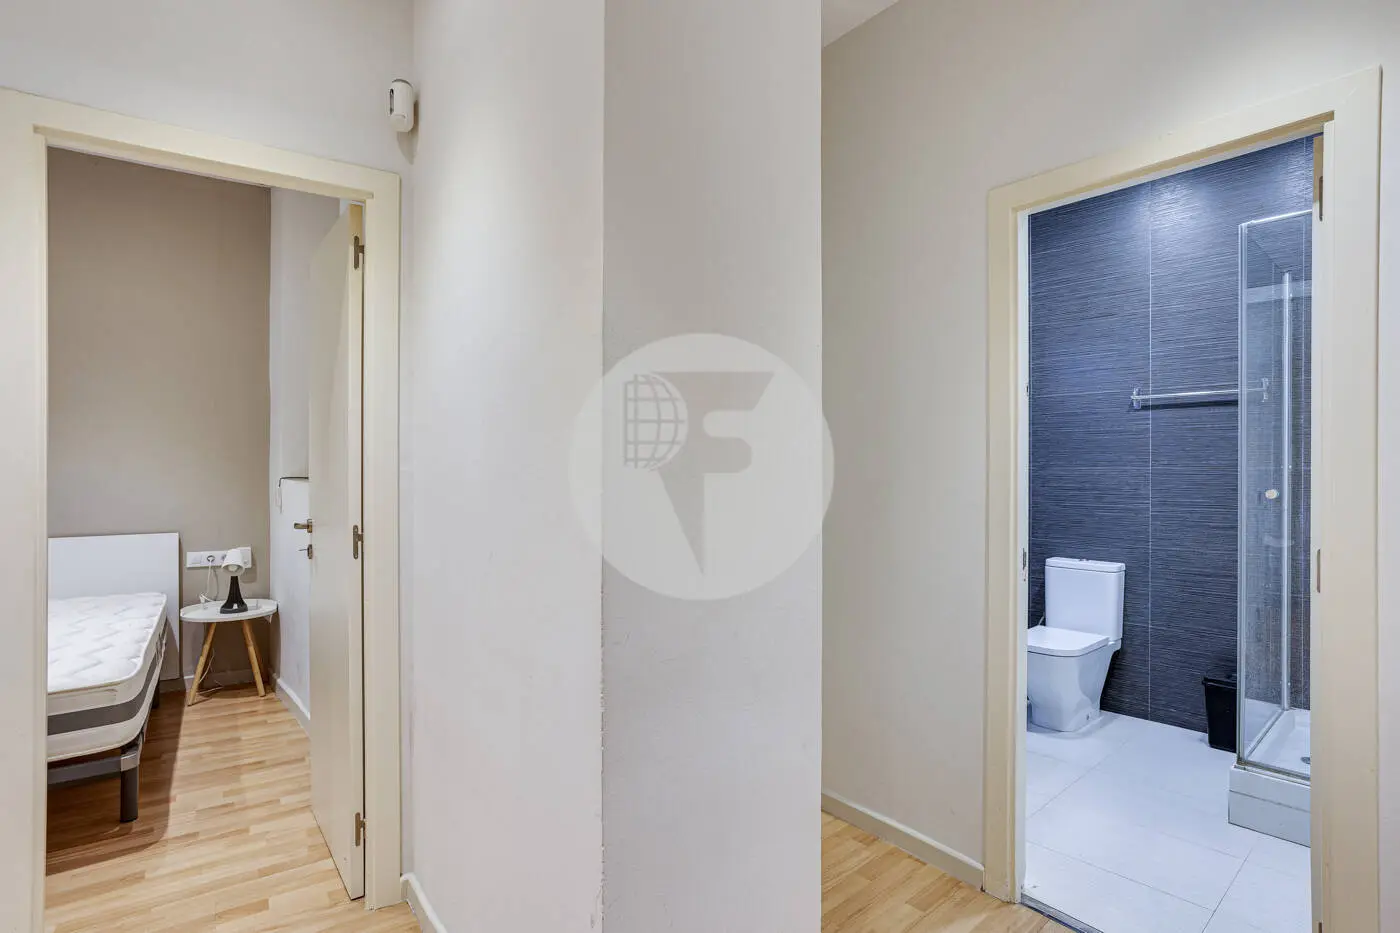 Magnificent apartment for sale next to Pl Universitat of 114m2 according to the land registry, located on Tallers Street in the Ciutat Vella neighborhood of Barcelona 12